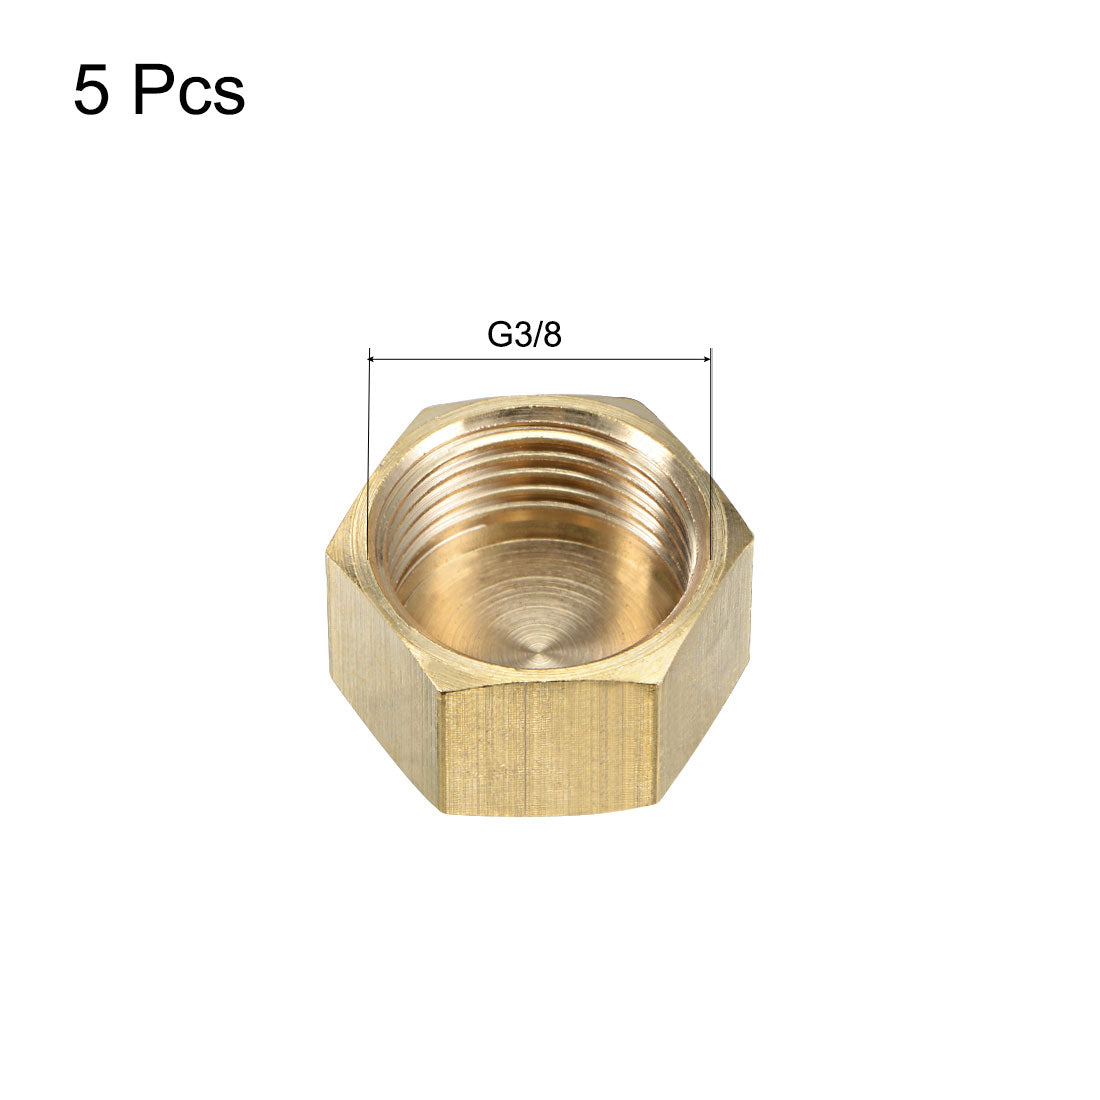 uxcell Uxcell Brass Cap 5pcs G3/8 Female Pipe Fitting Hex Compression Stop Valve Connector